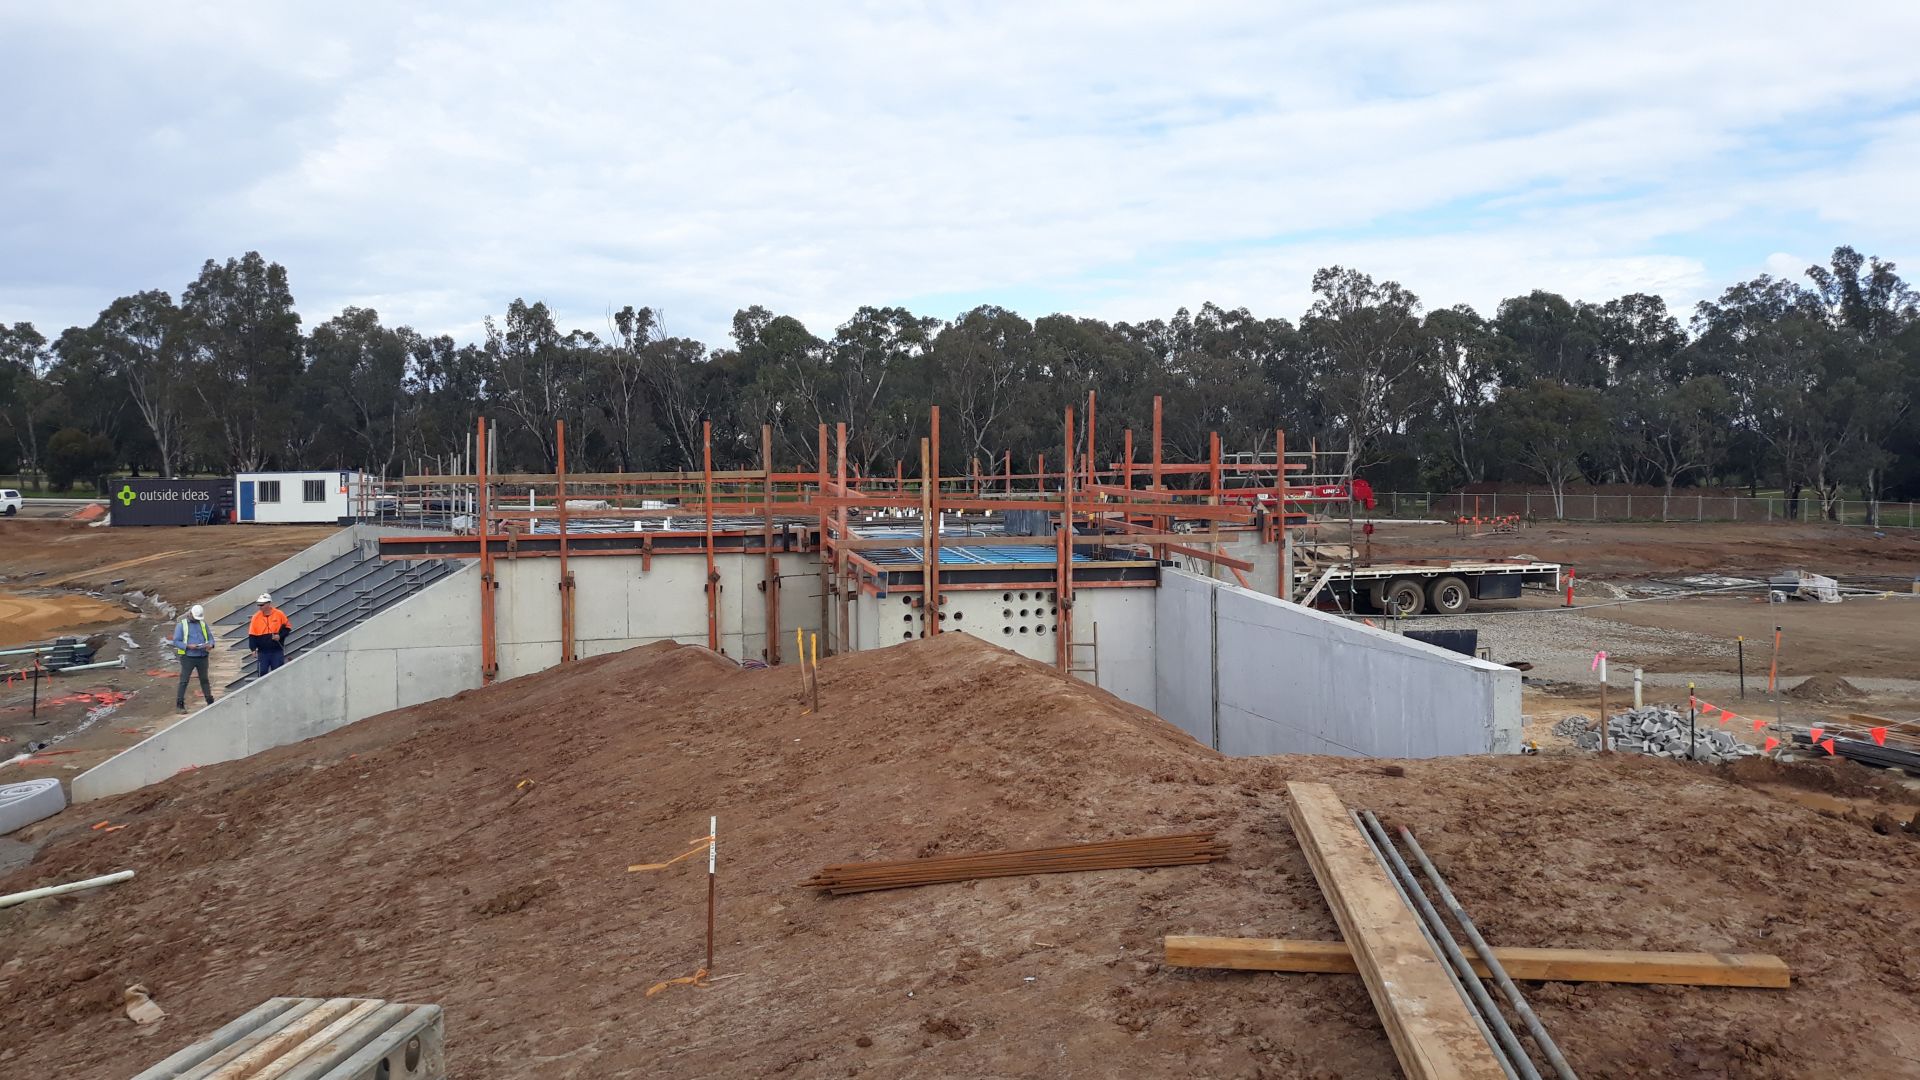 Building A (AFL & Cricket) progress and preparation for first floor slab pour